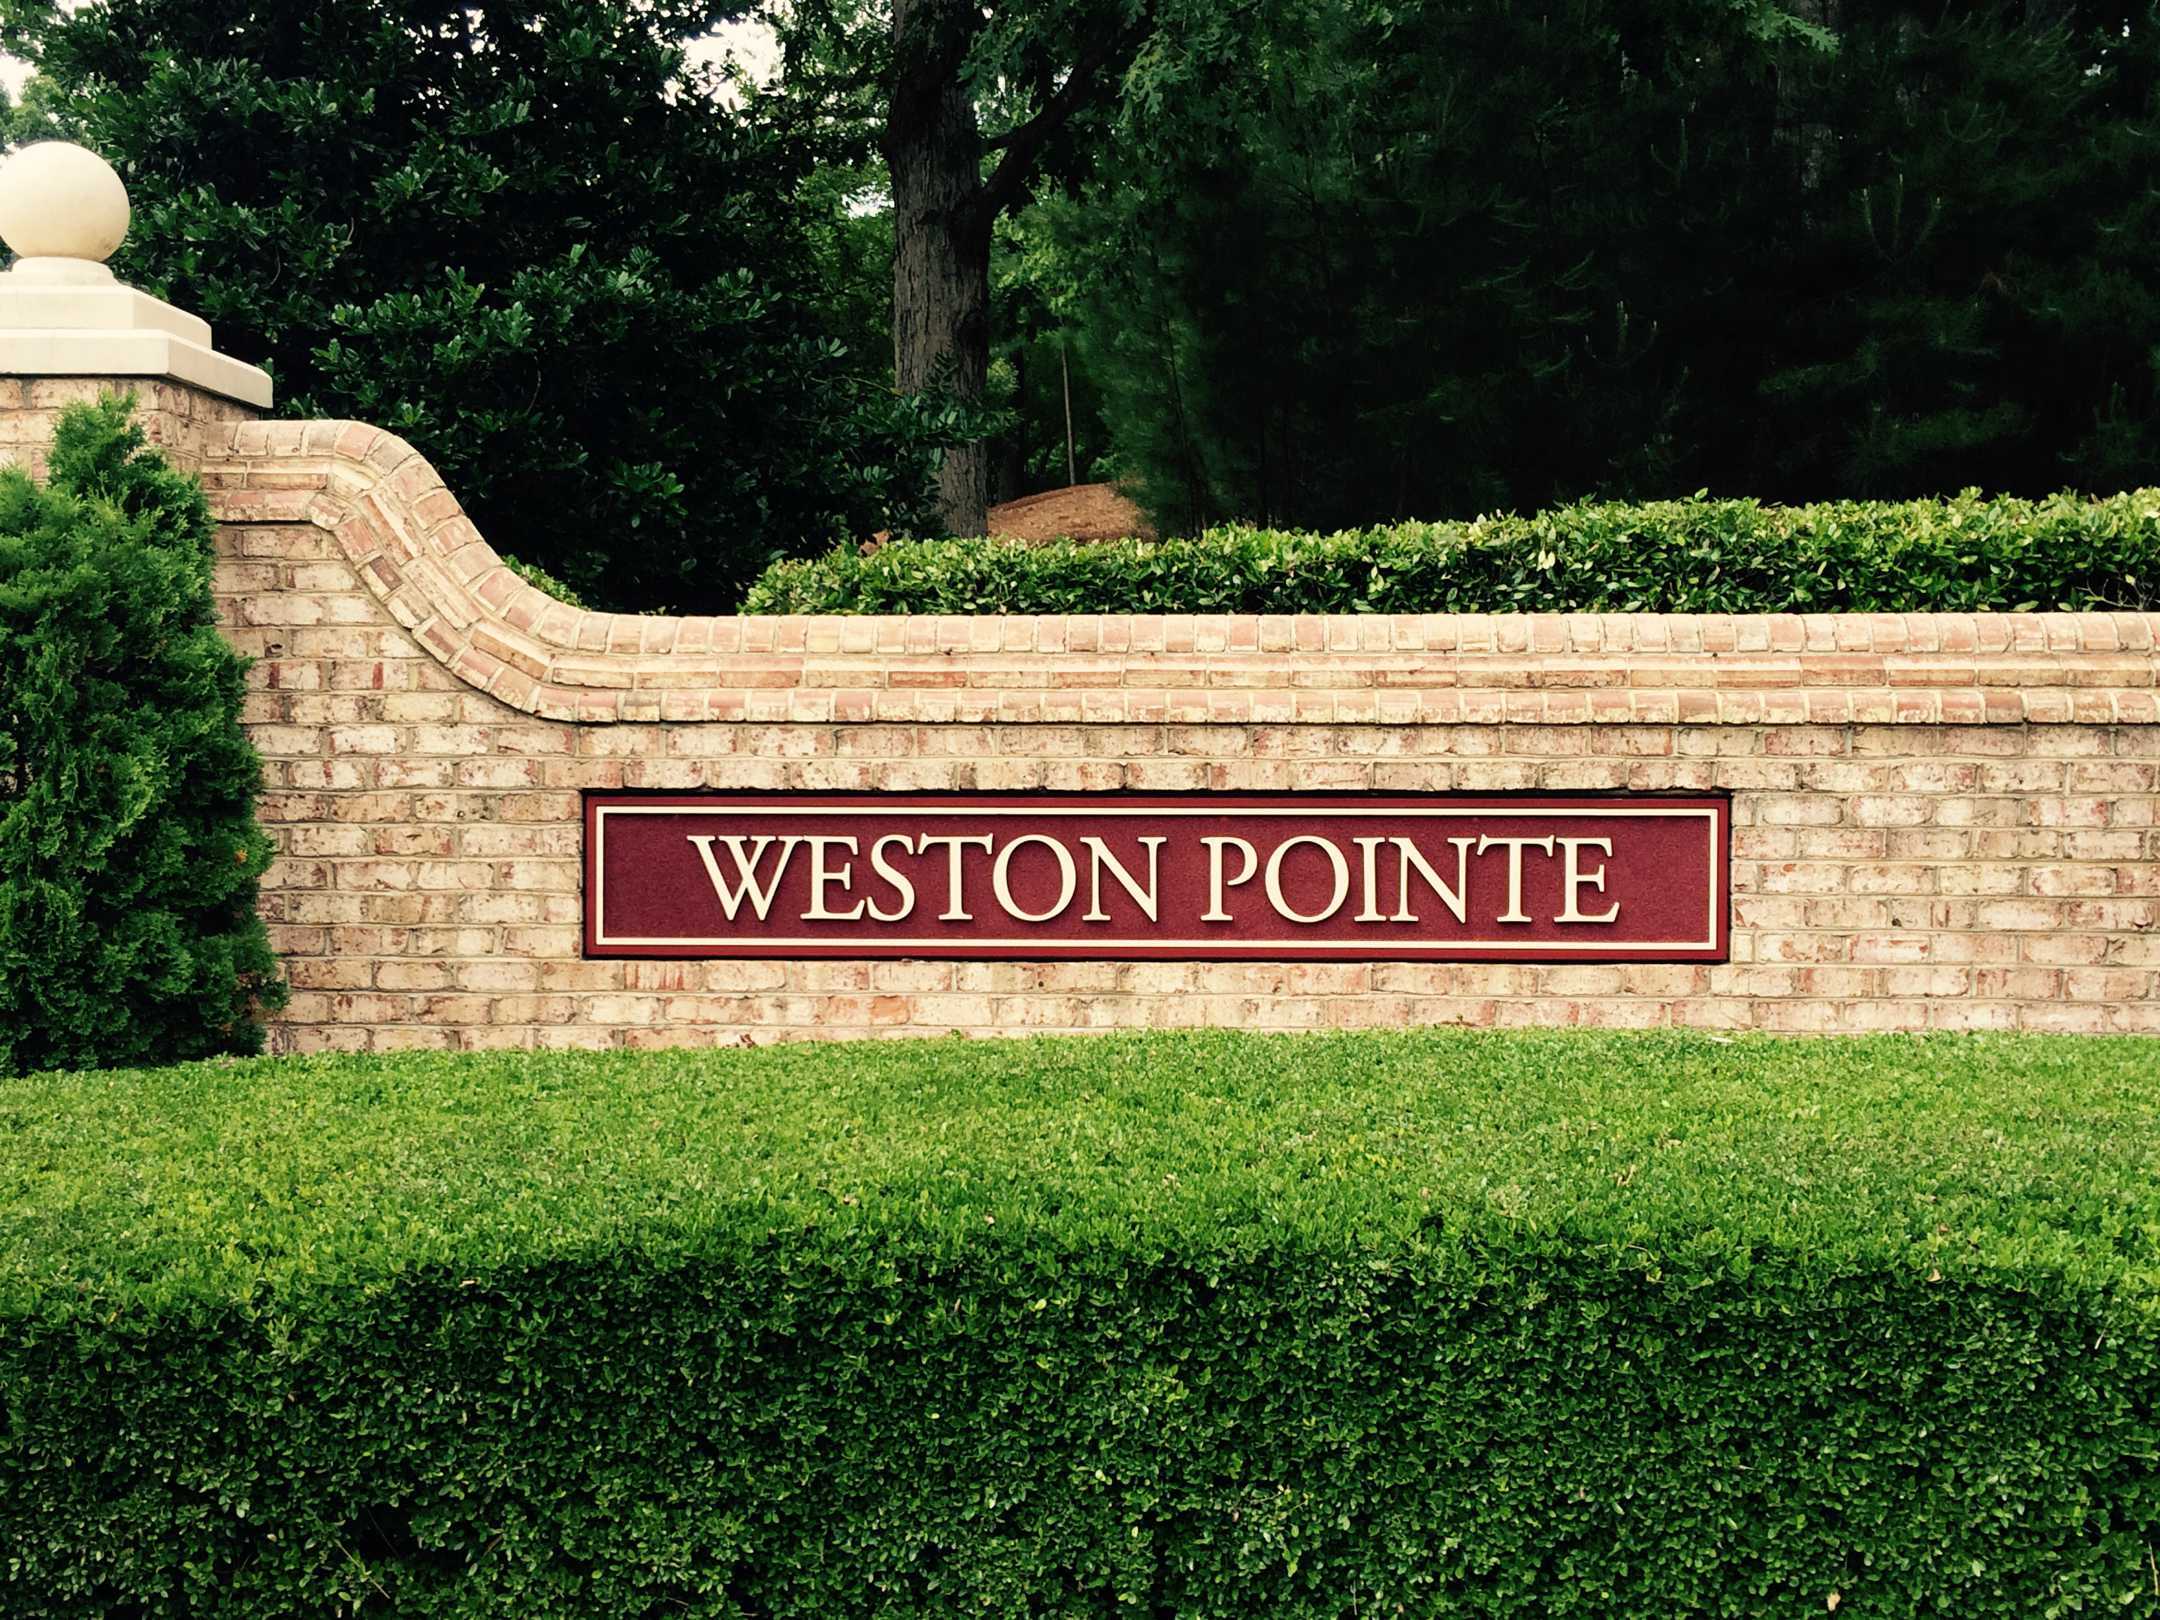 Entrance to Weston Pointe in Cary NC